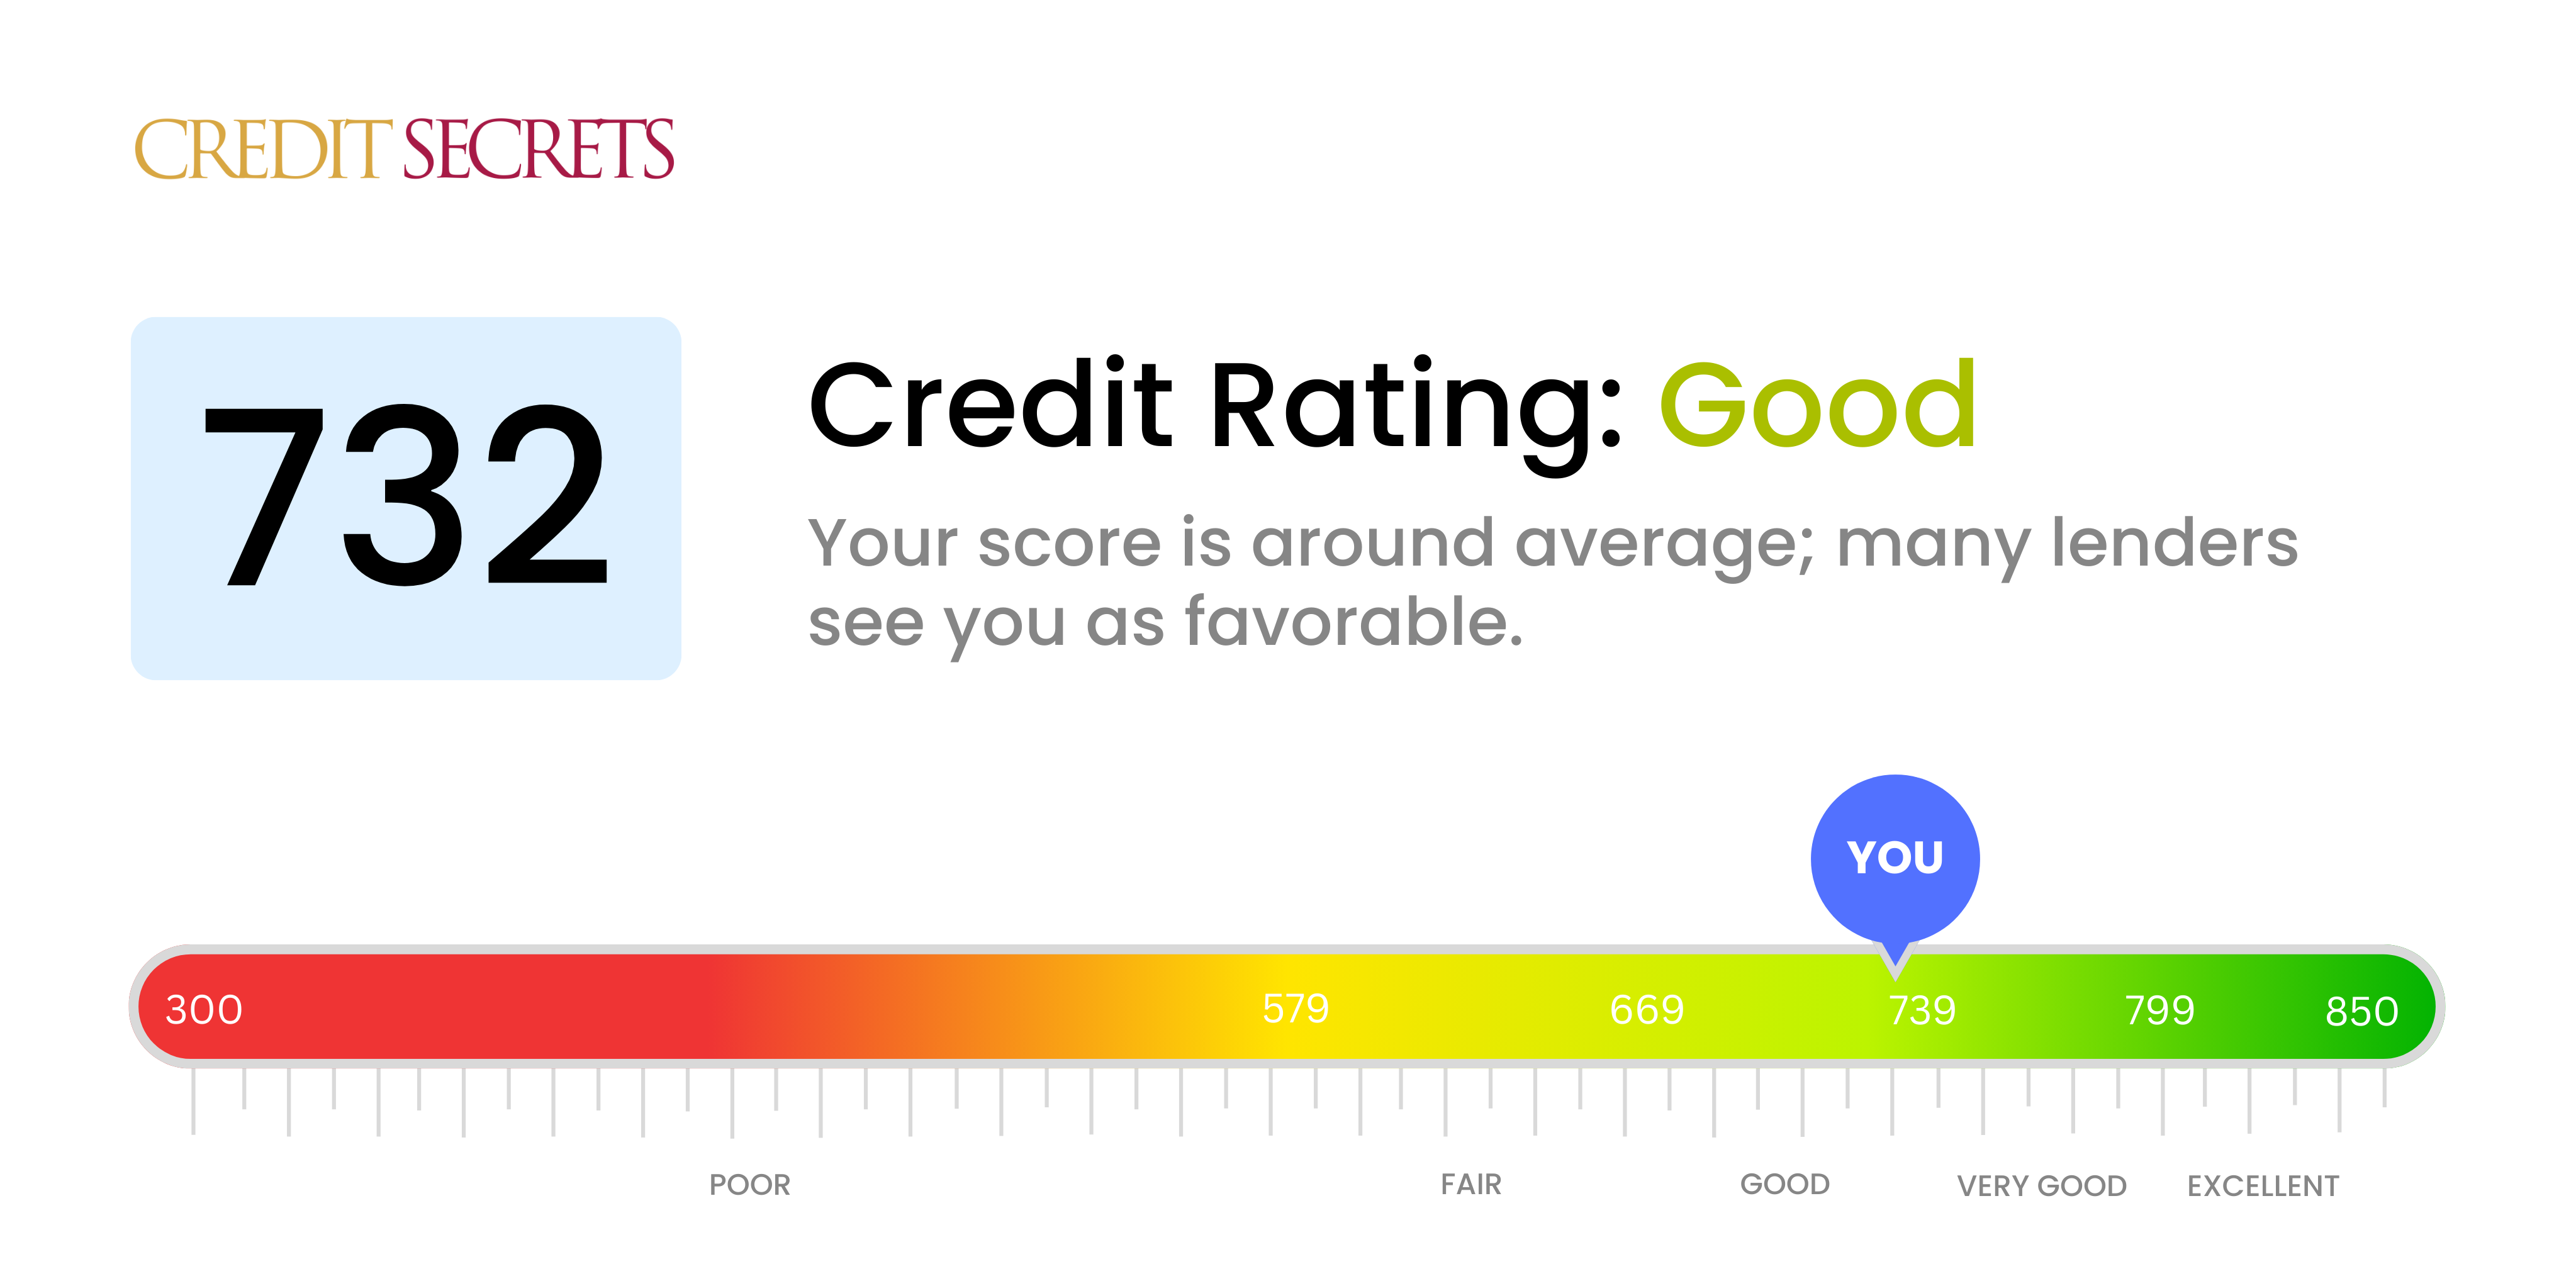 Is 732 a good credit score?